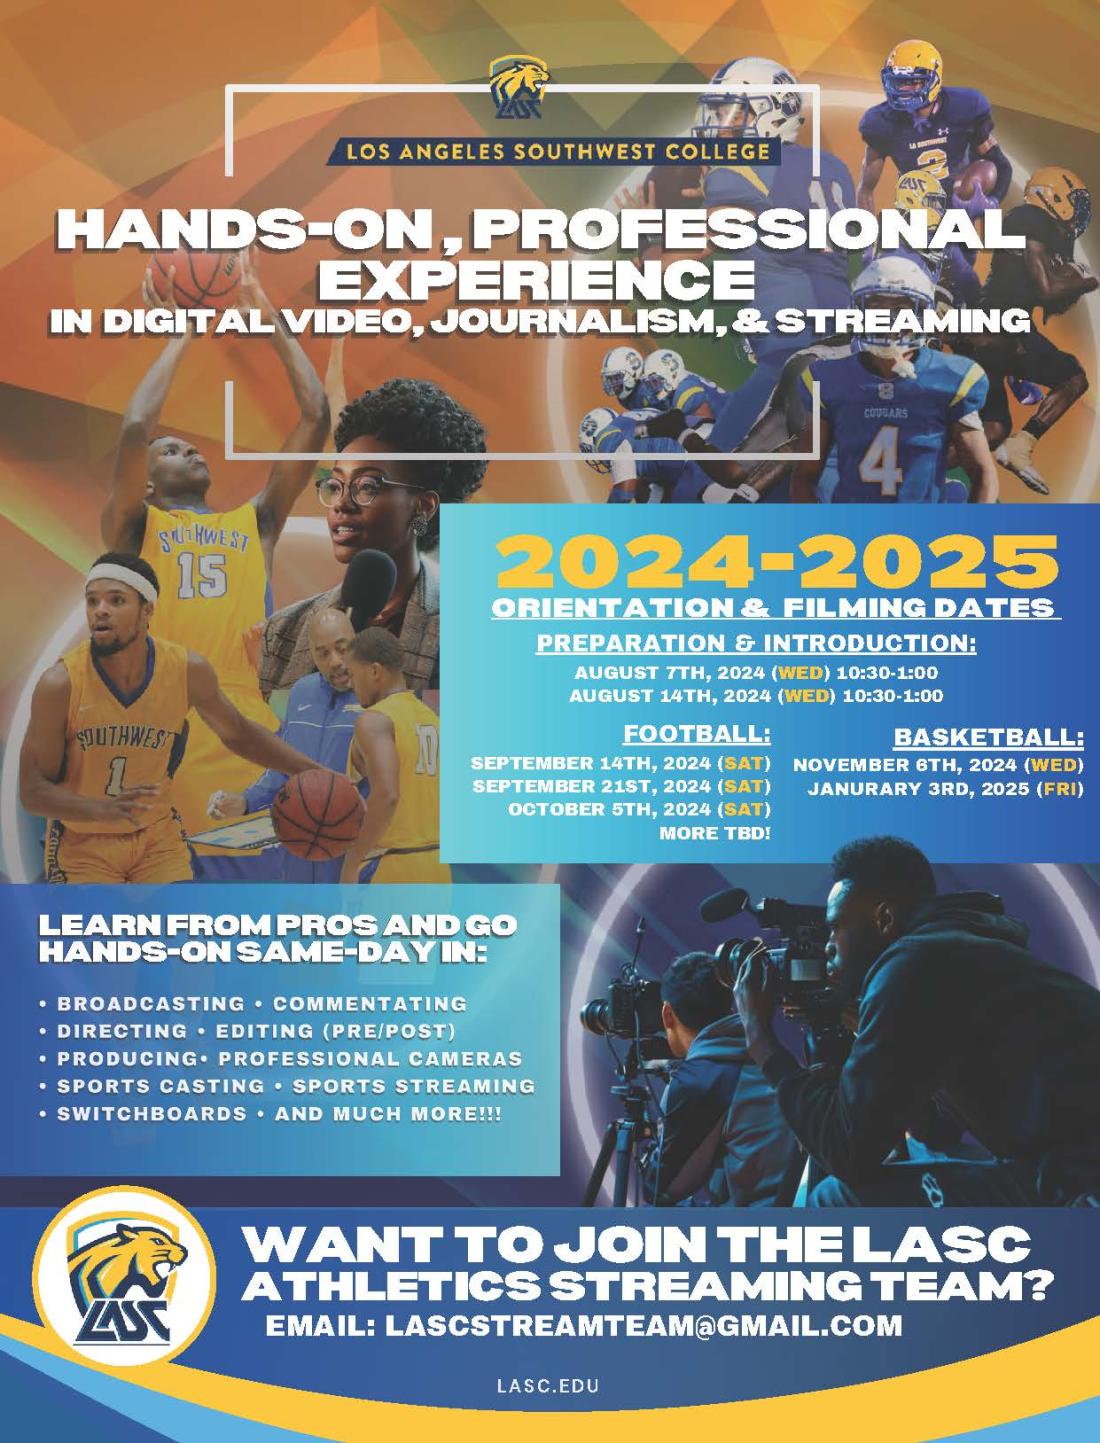 Flyer announcing hands-on professional experience in digital, video, journalism and streaming